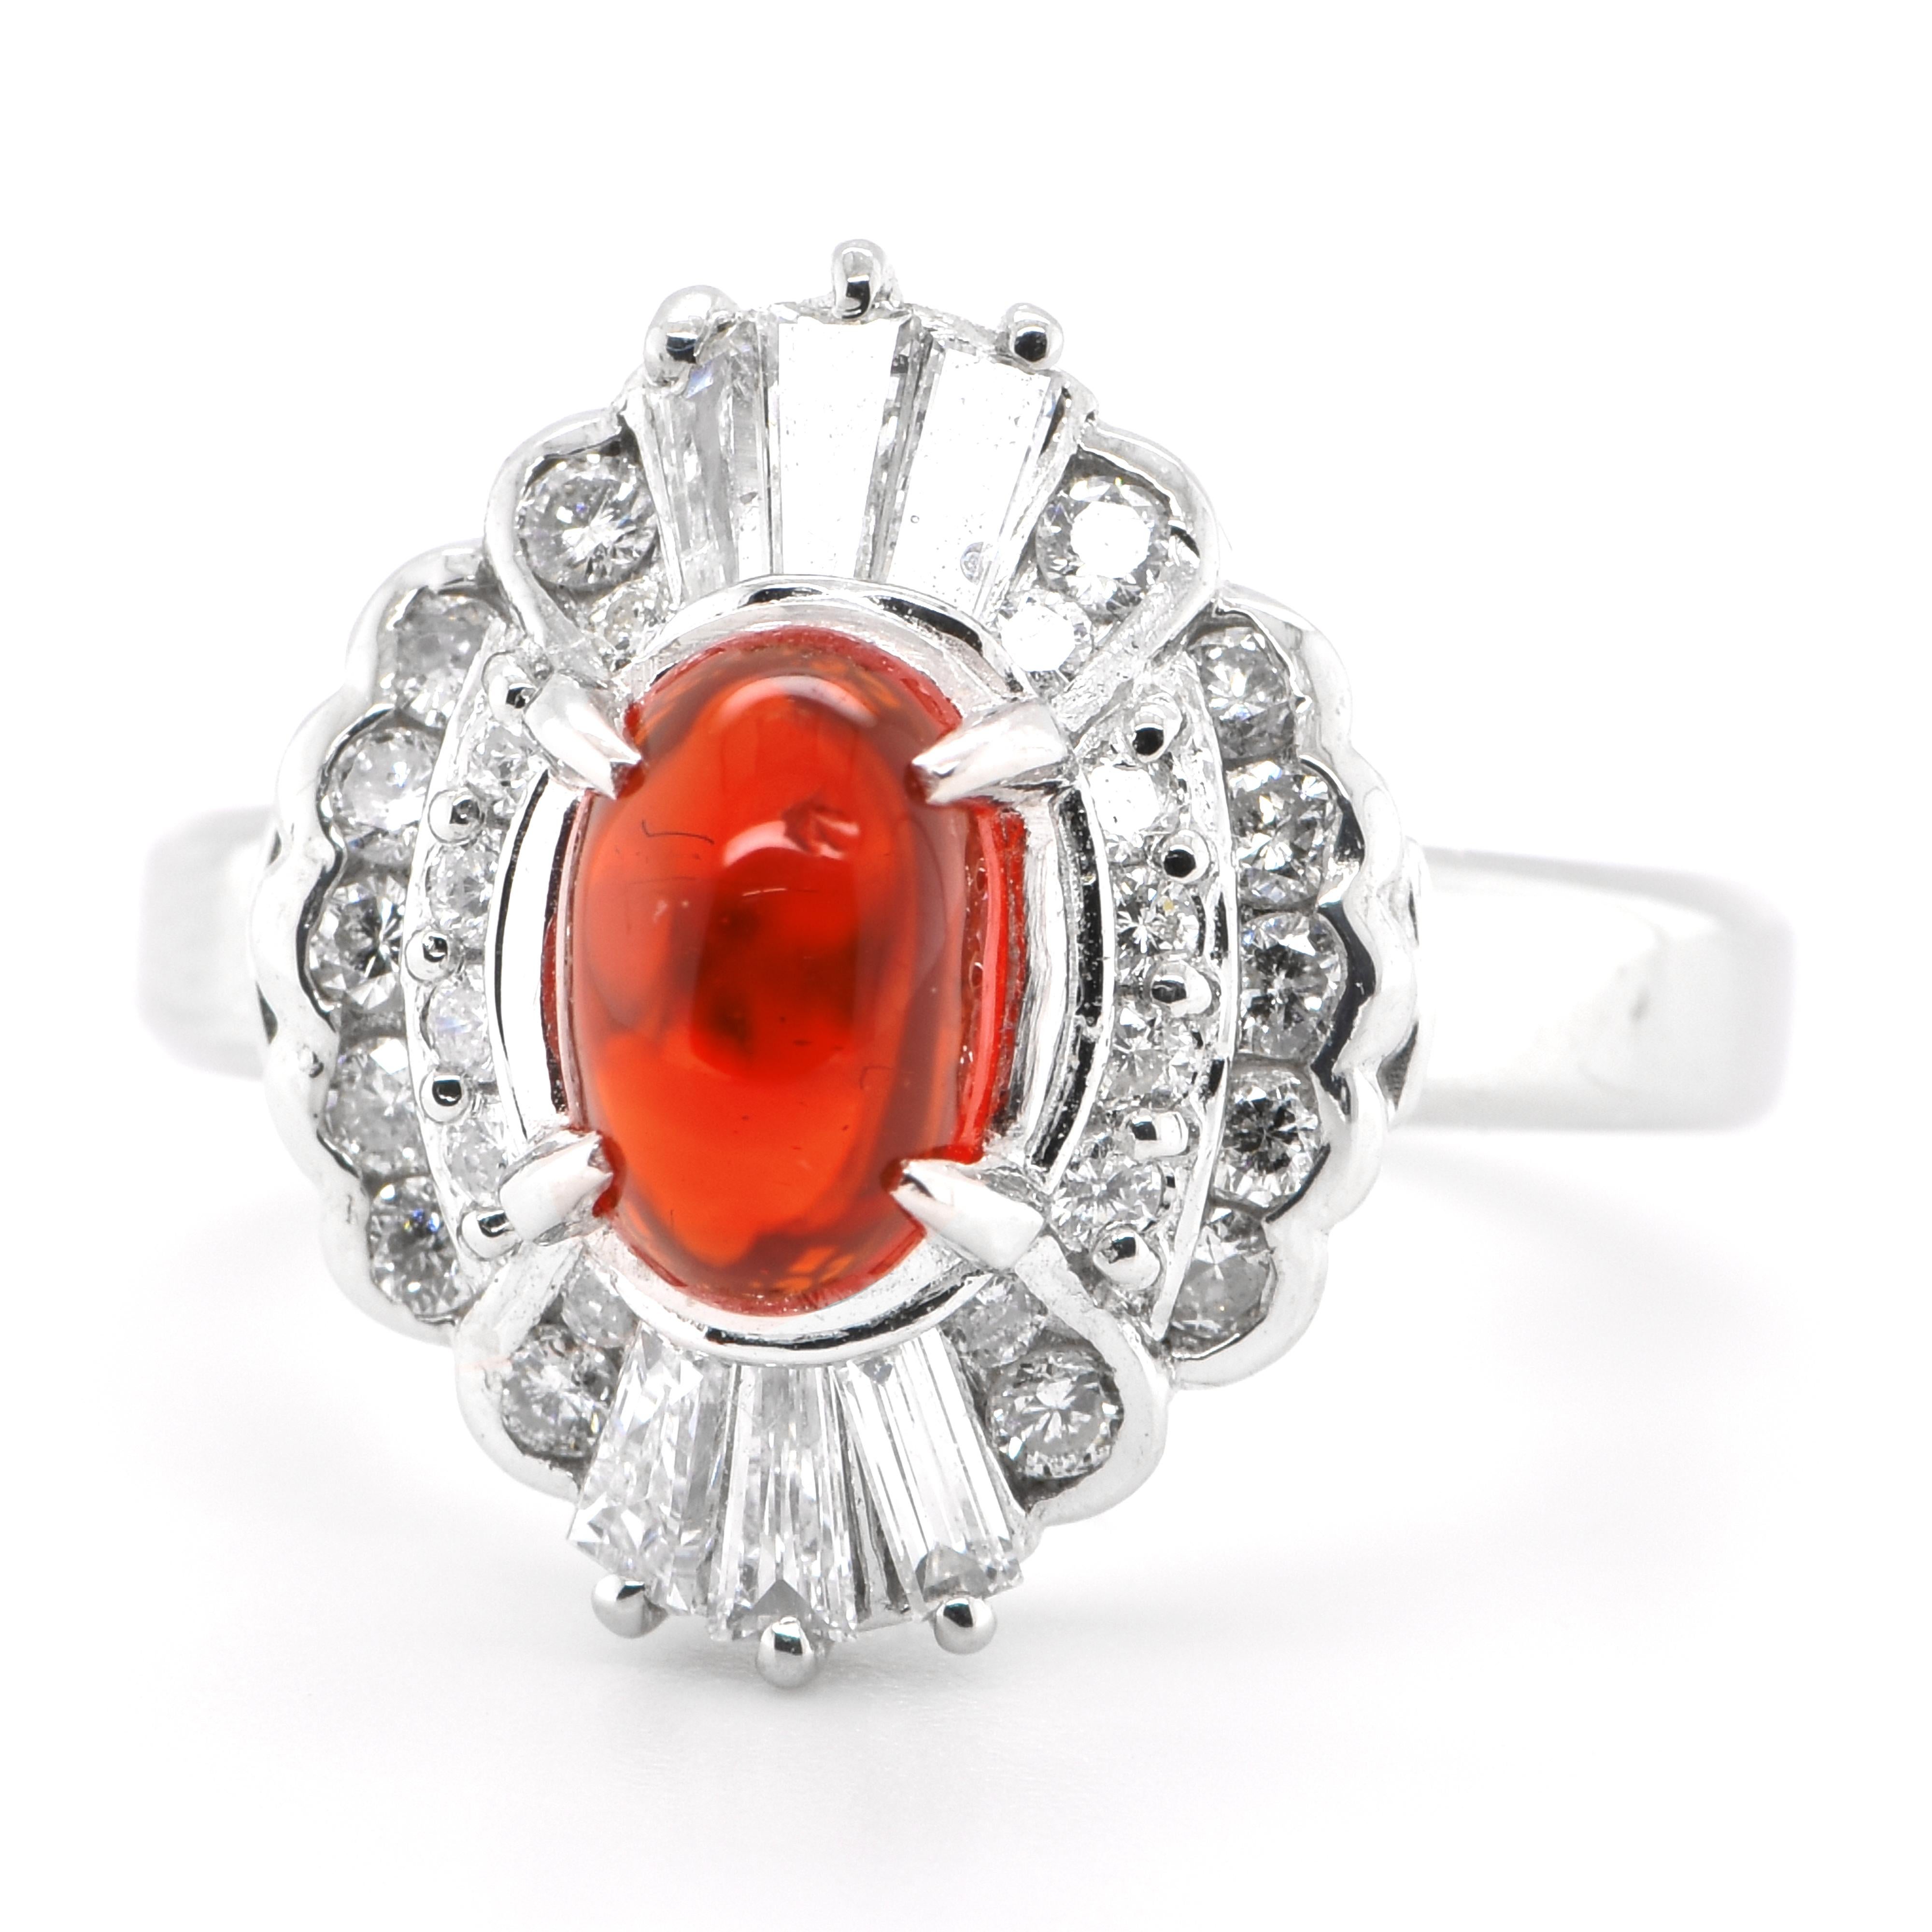 A beautiful vintage ring featuring a 1.07 Carat Natural Mexican Fire Opal with very good play of color and 0.69 Carats of Diamond Accents set in Platinum. Opals are known for exhibiting flashes of rainbow colors known as 